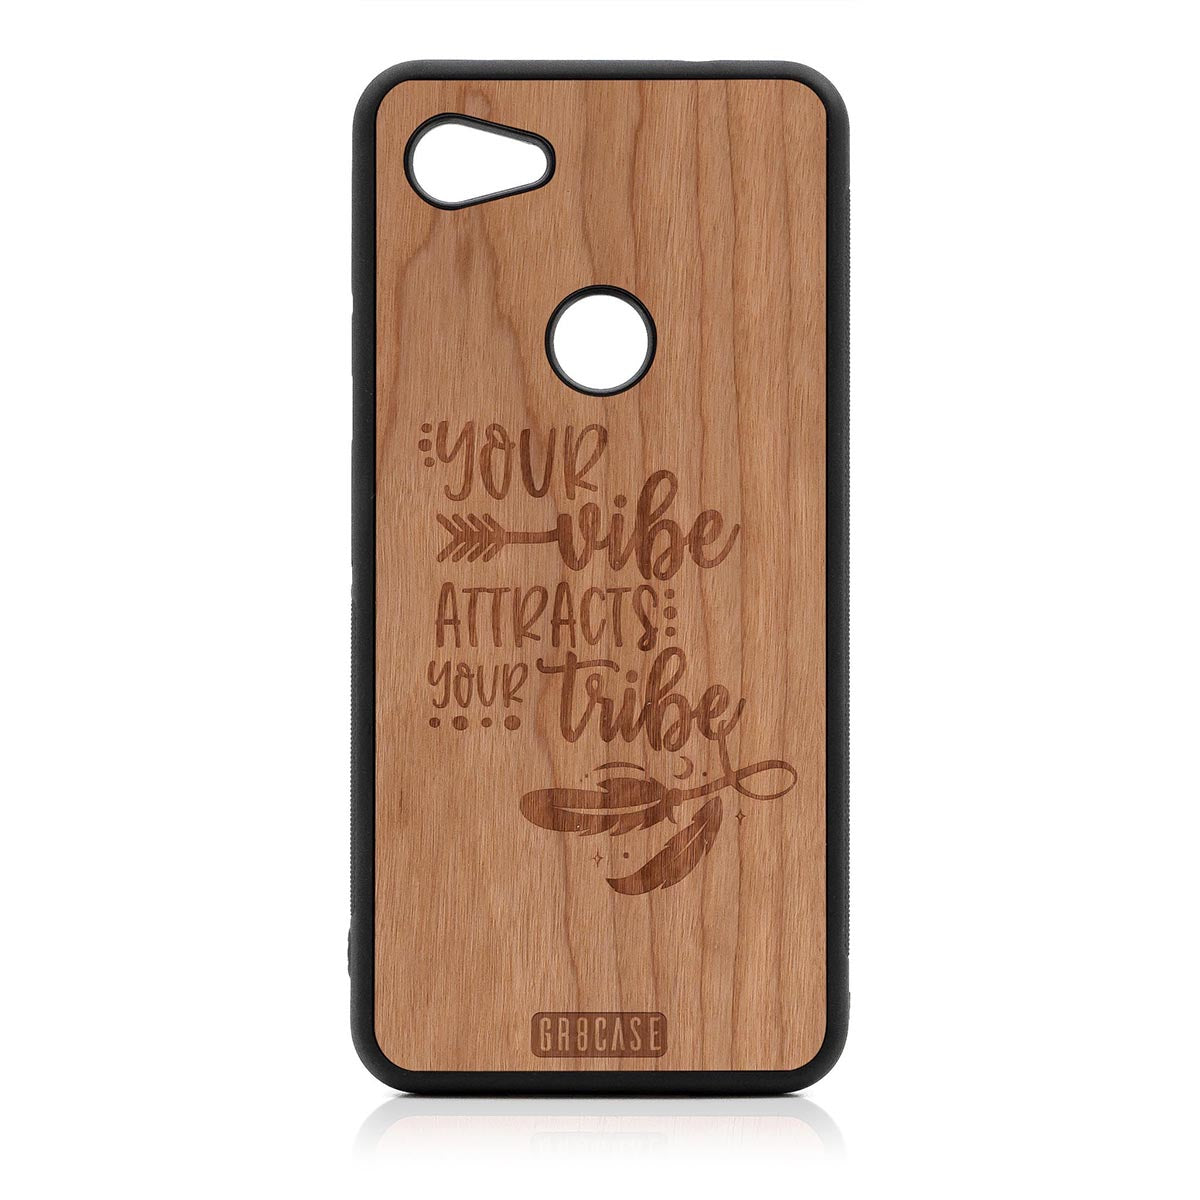 Your Vibe Attracts Your Tribe Design Wood Case Google Pixel 3A